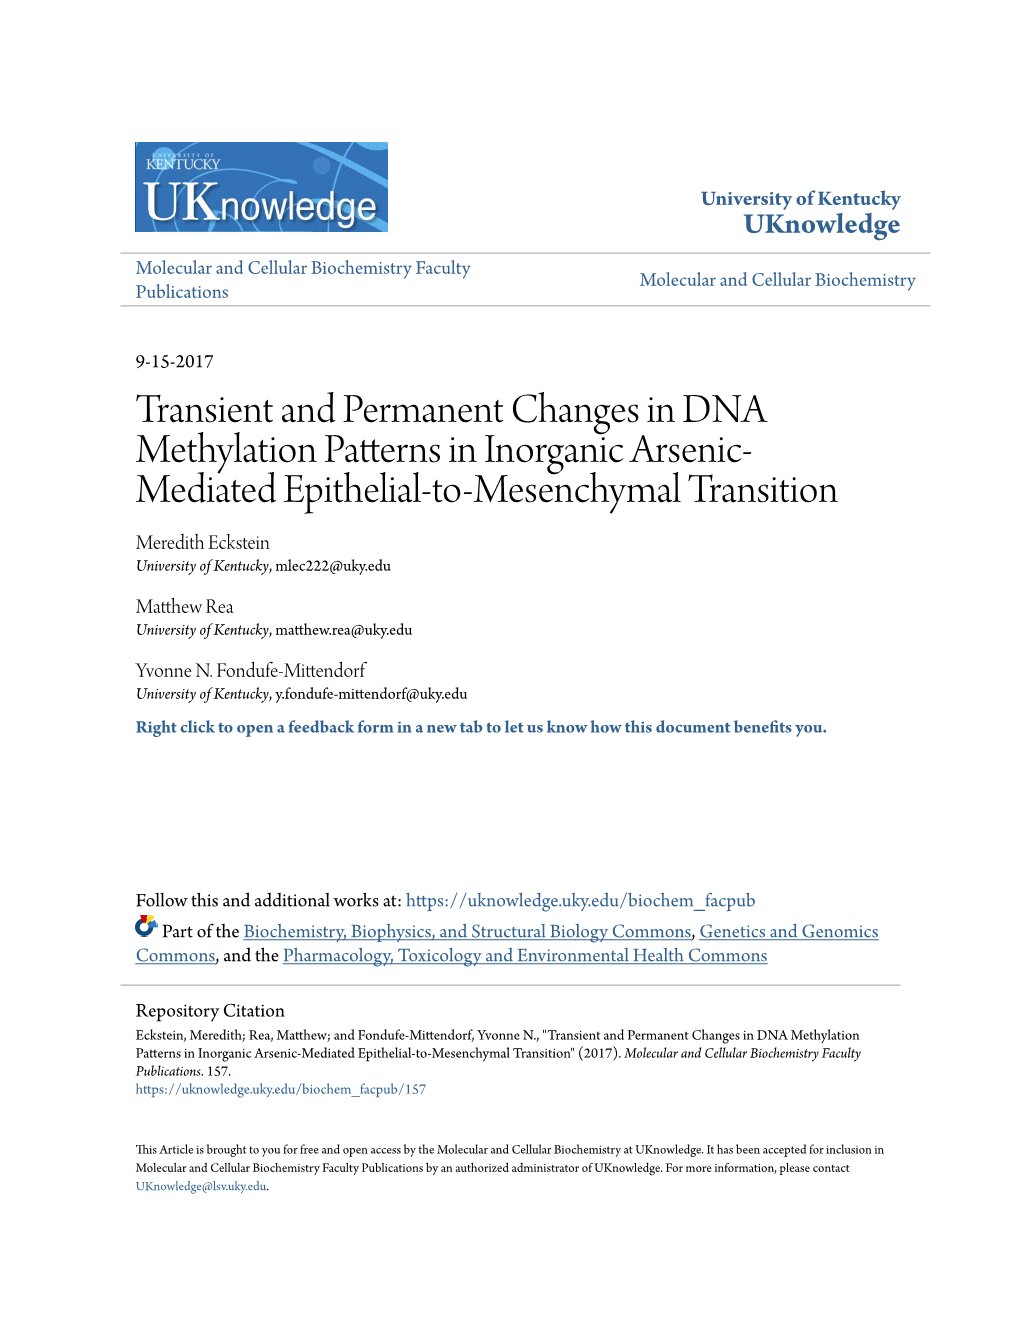 Transient and Permanent Changes in DNA Methylation Patterns In